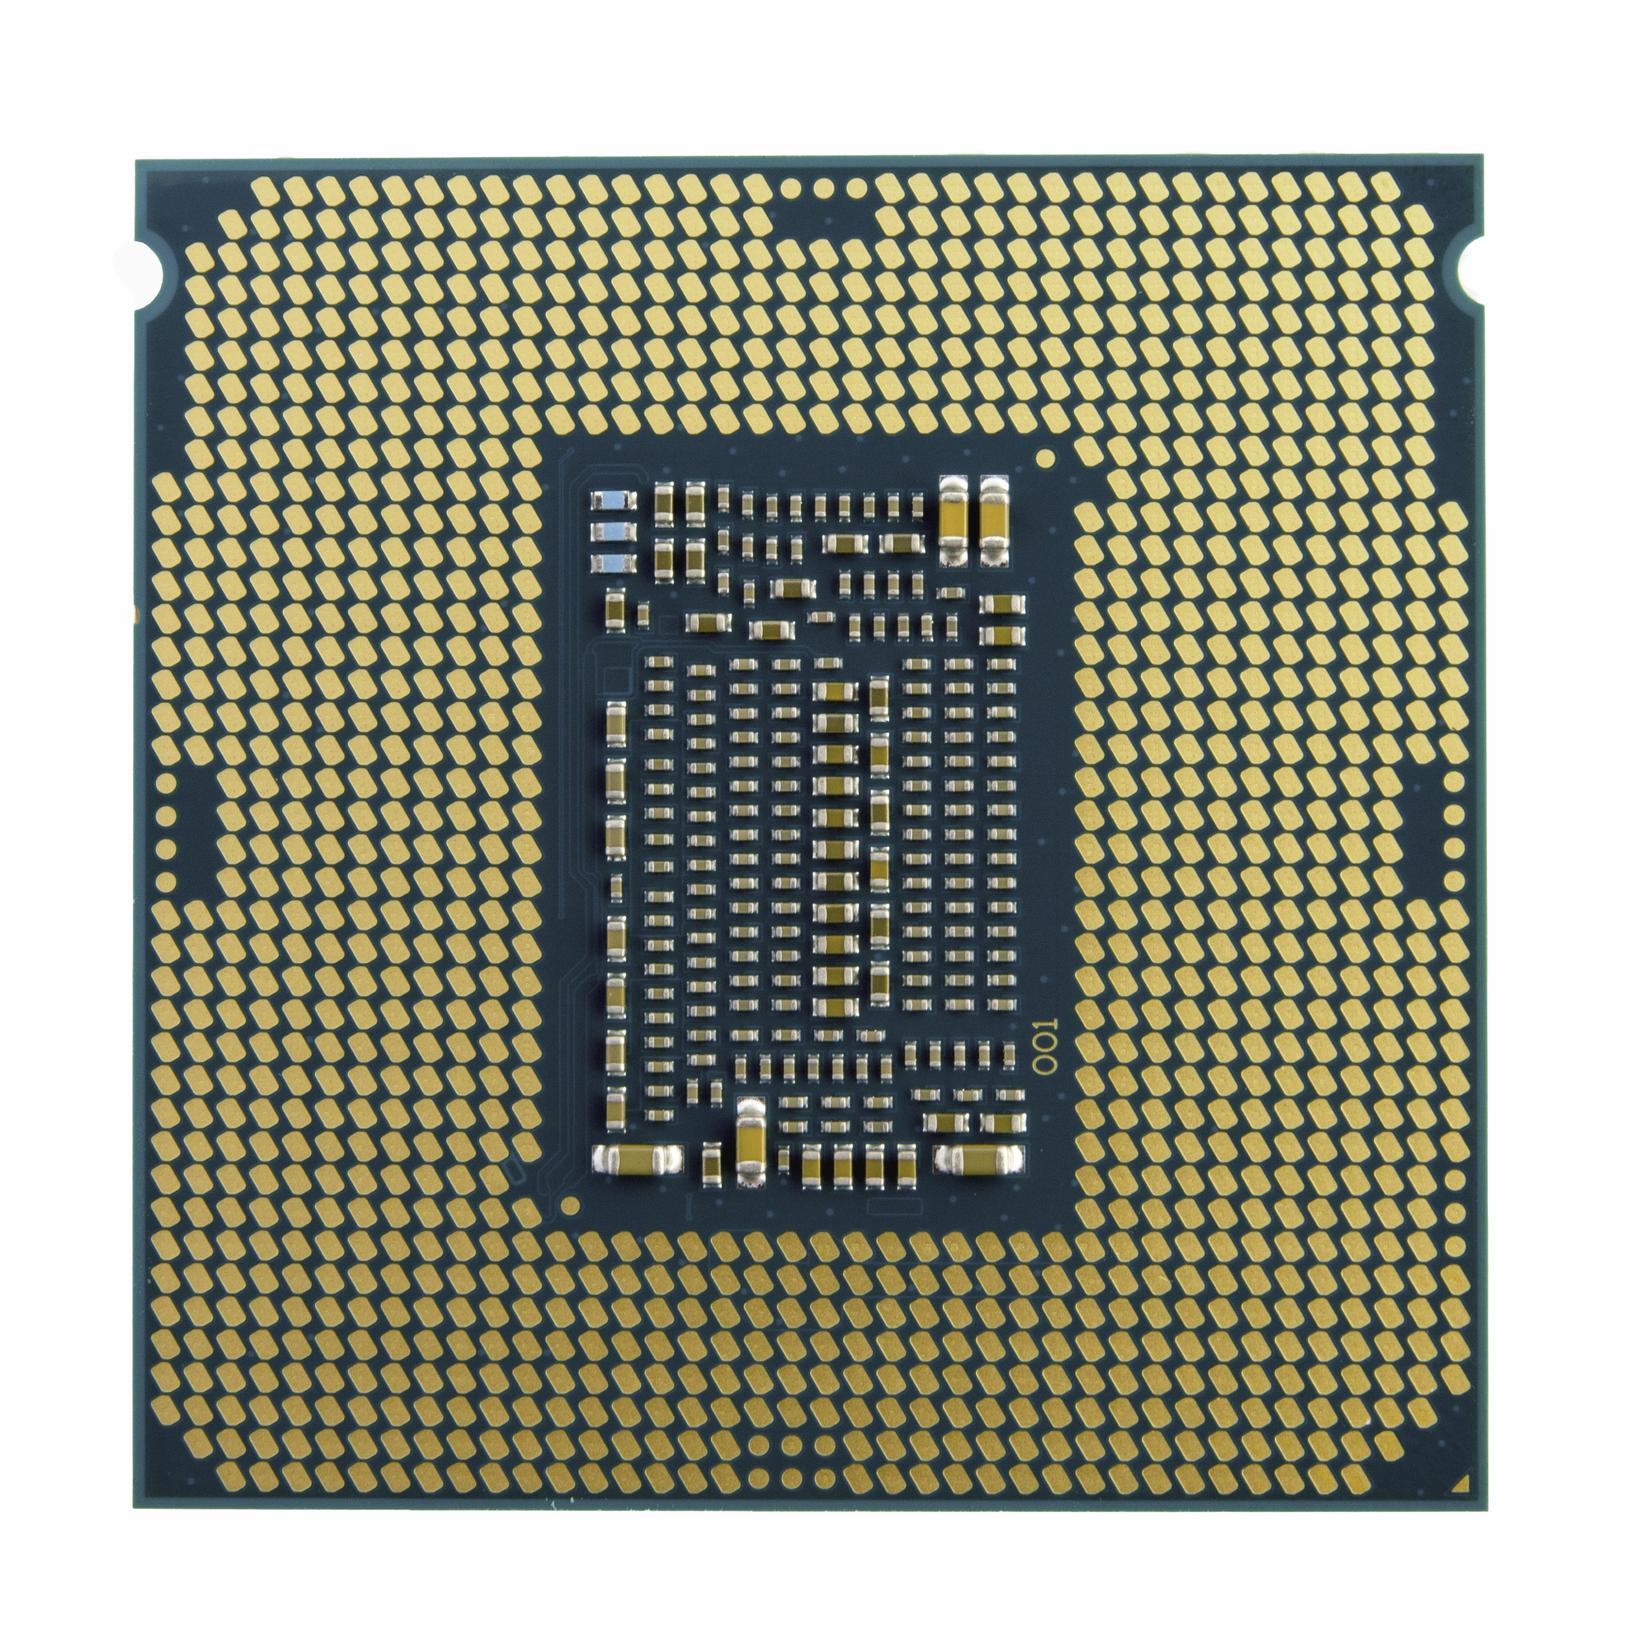 Selected image for INTEL Procesor 1200 i7-10700F 2.9 GHz